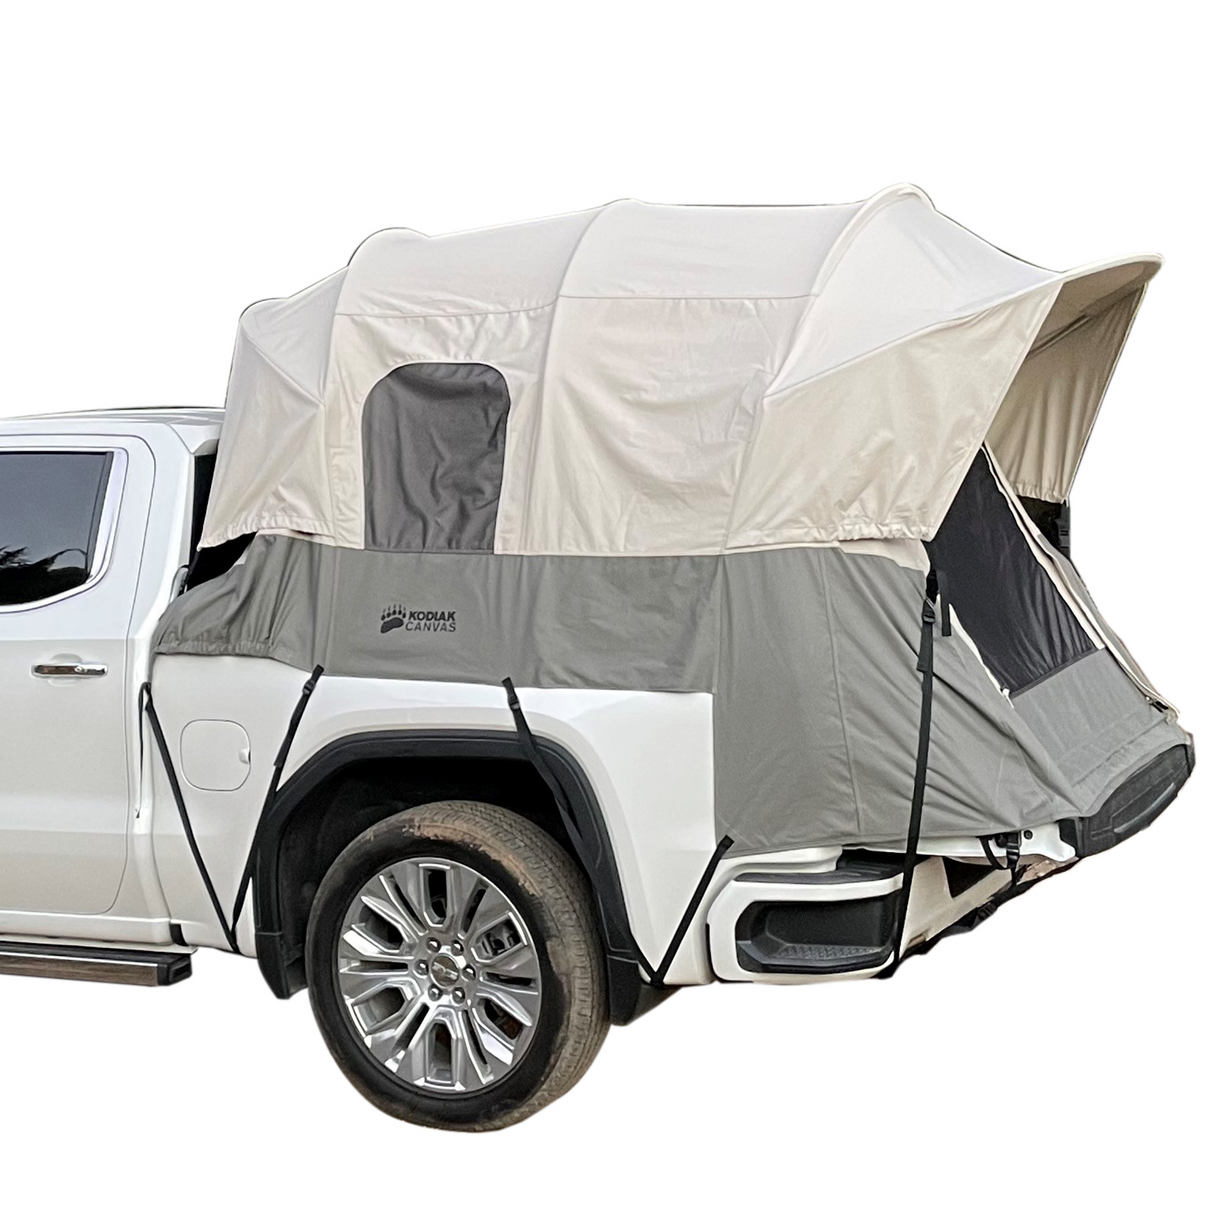 Tent Body Full Sized 8 ft. Truck Tent (Tent Body Only)